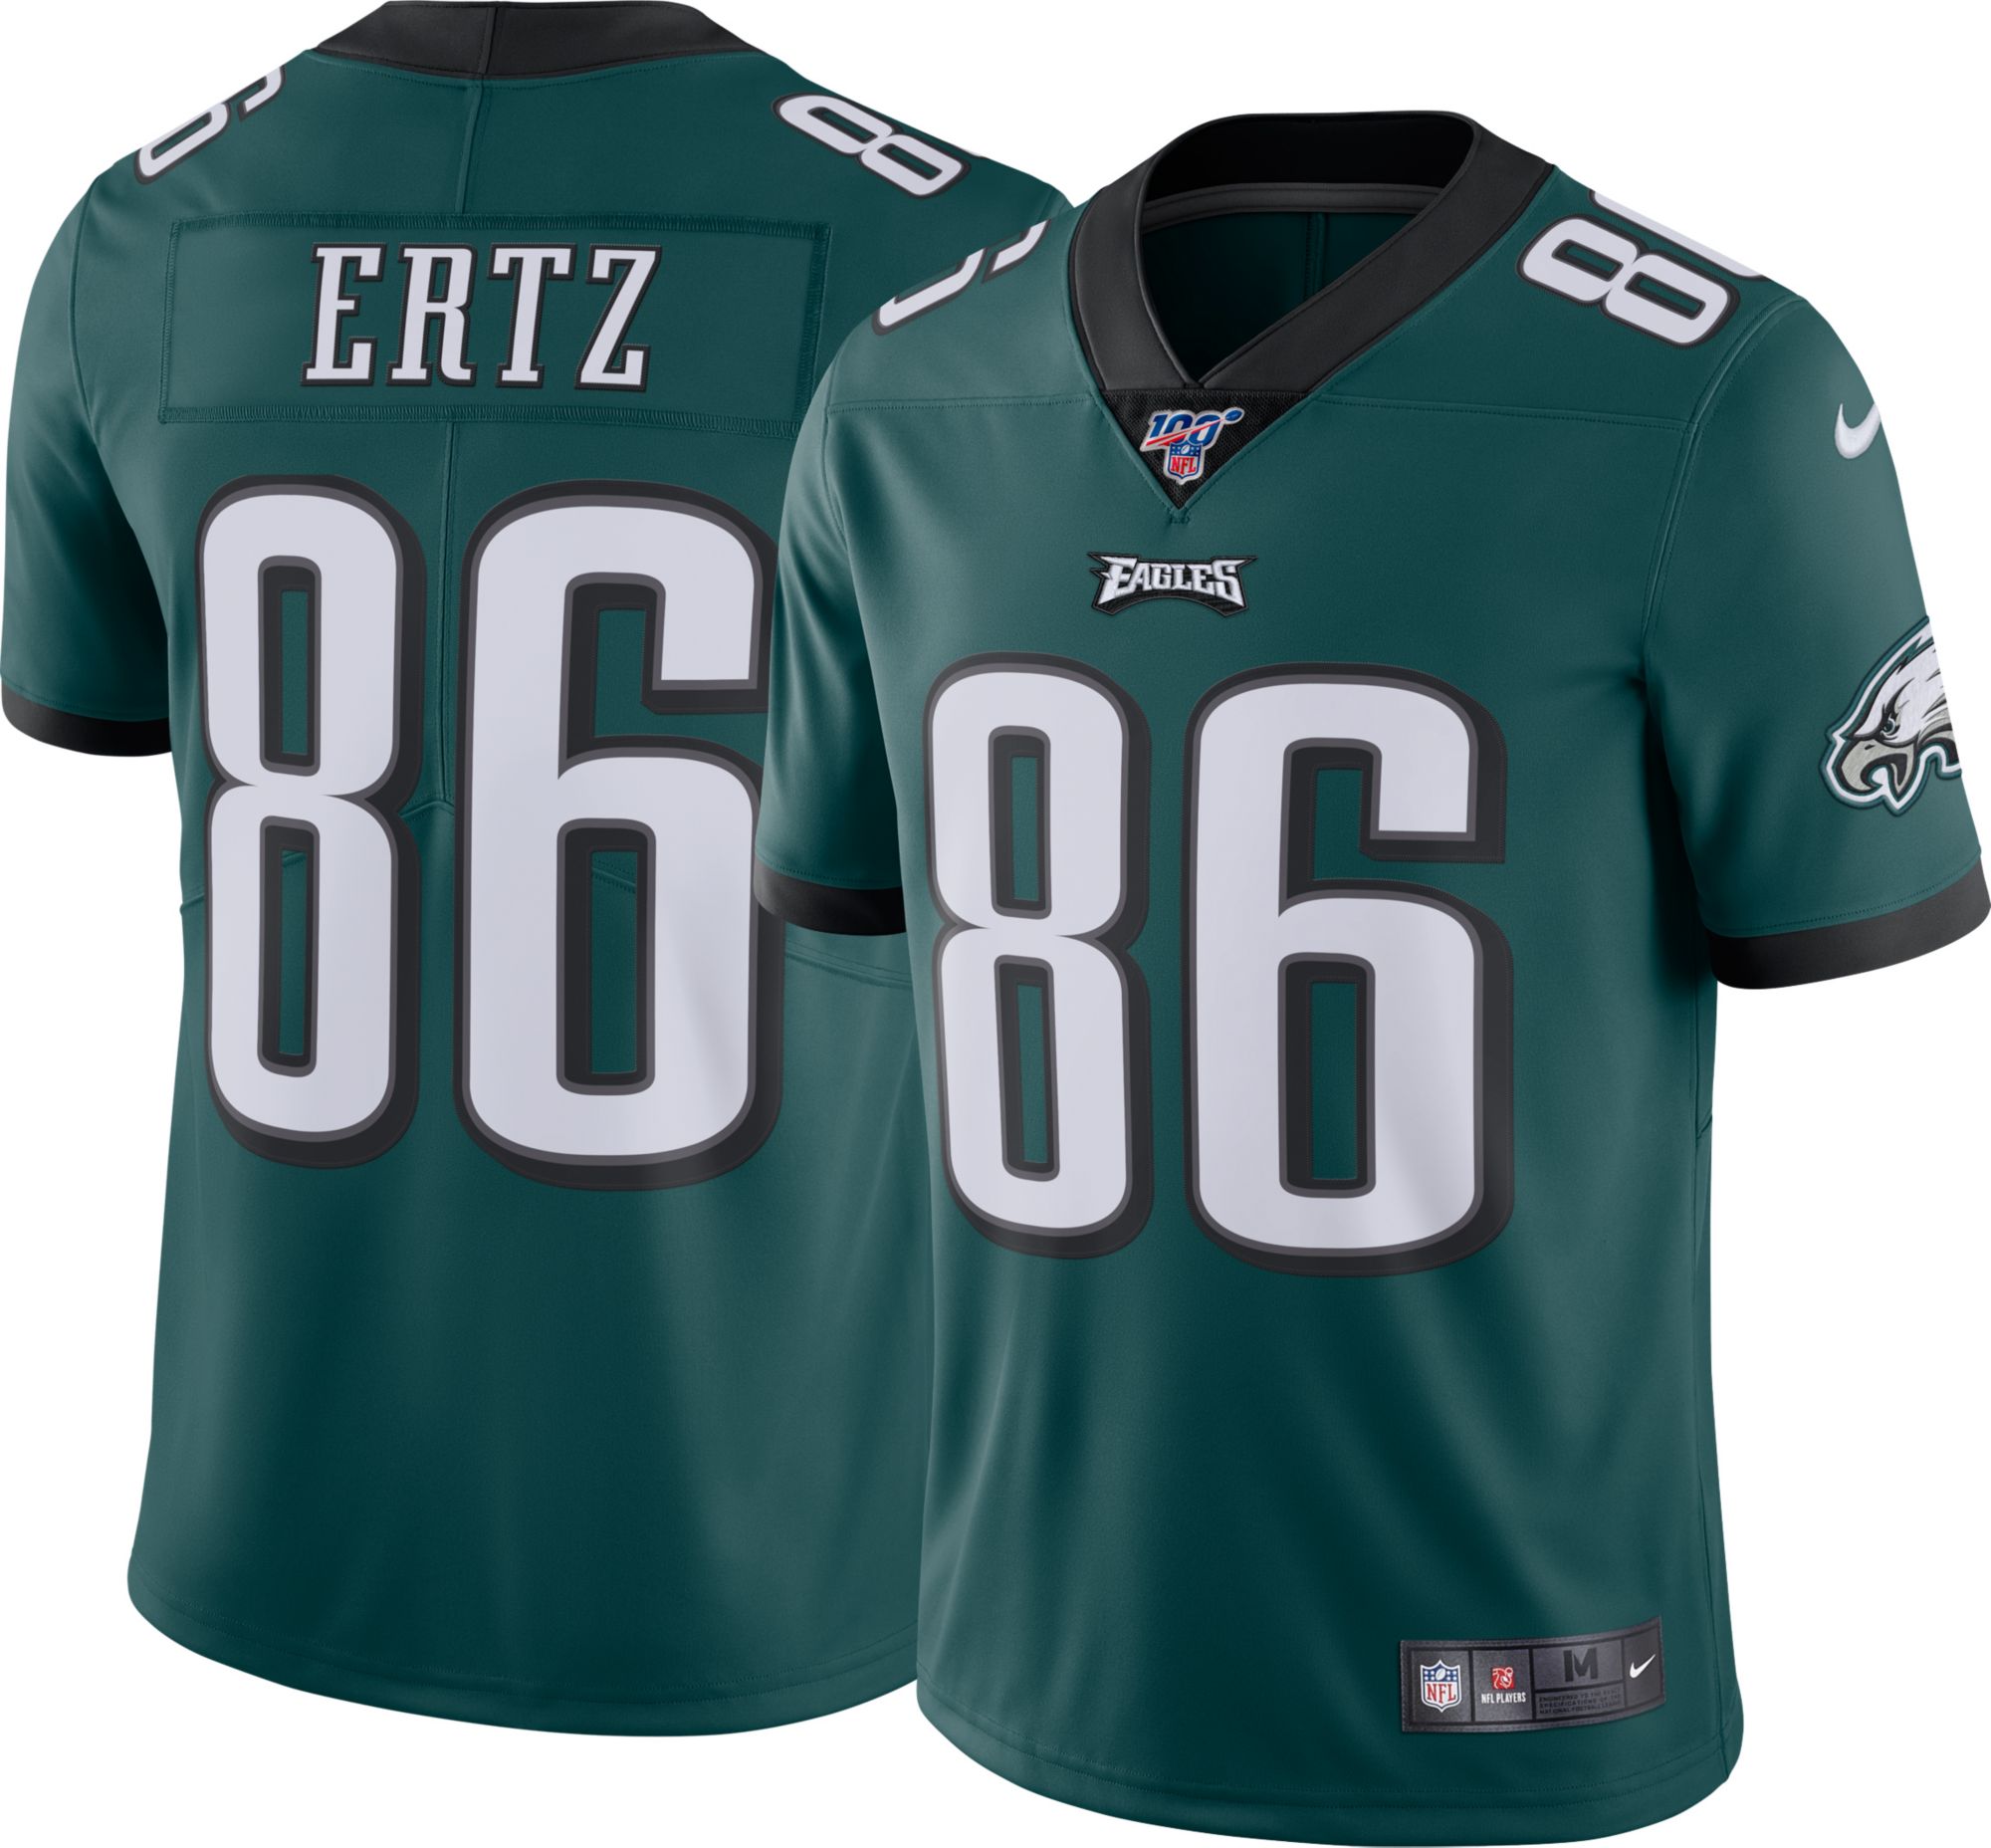 where can i buy an eagles jersey